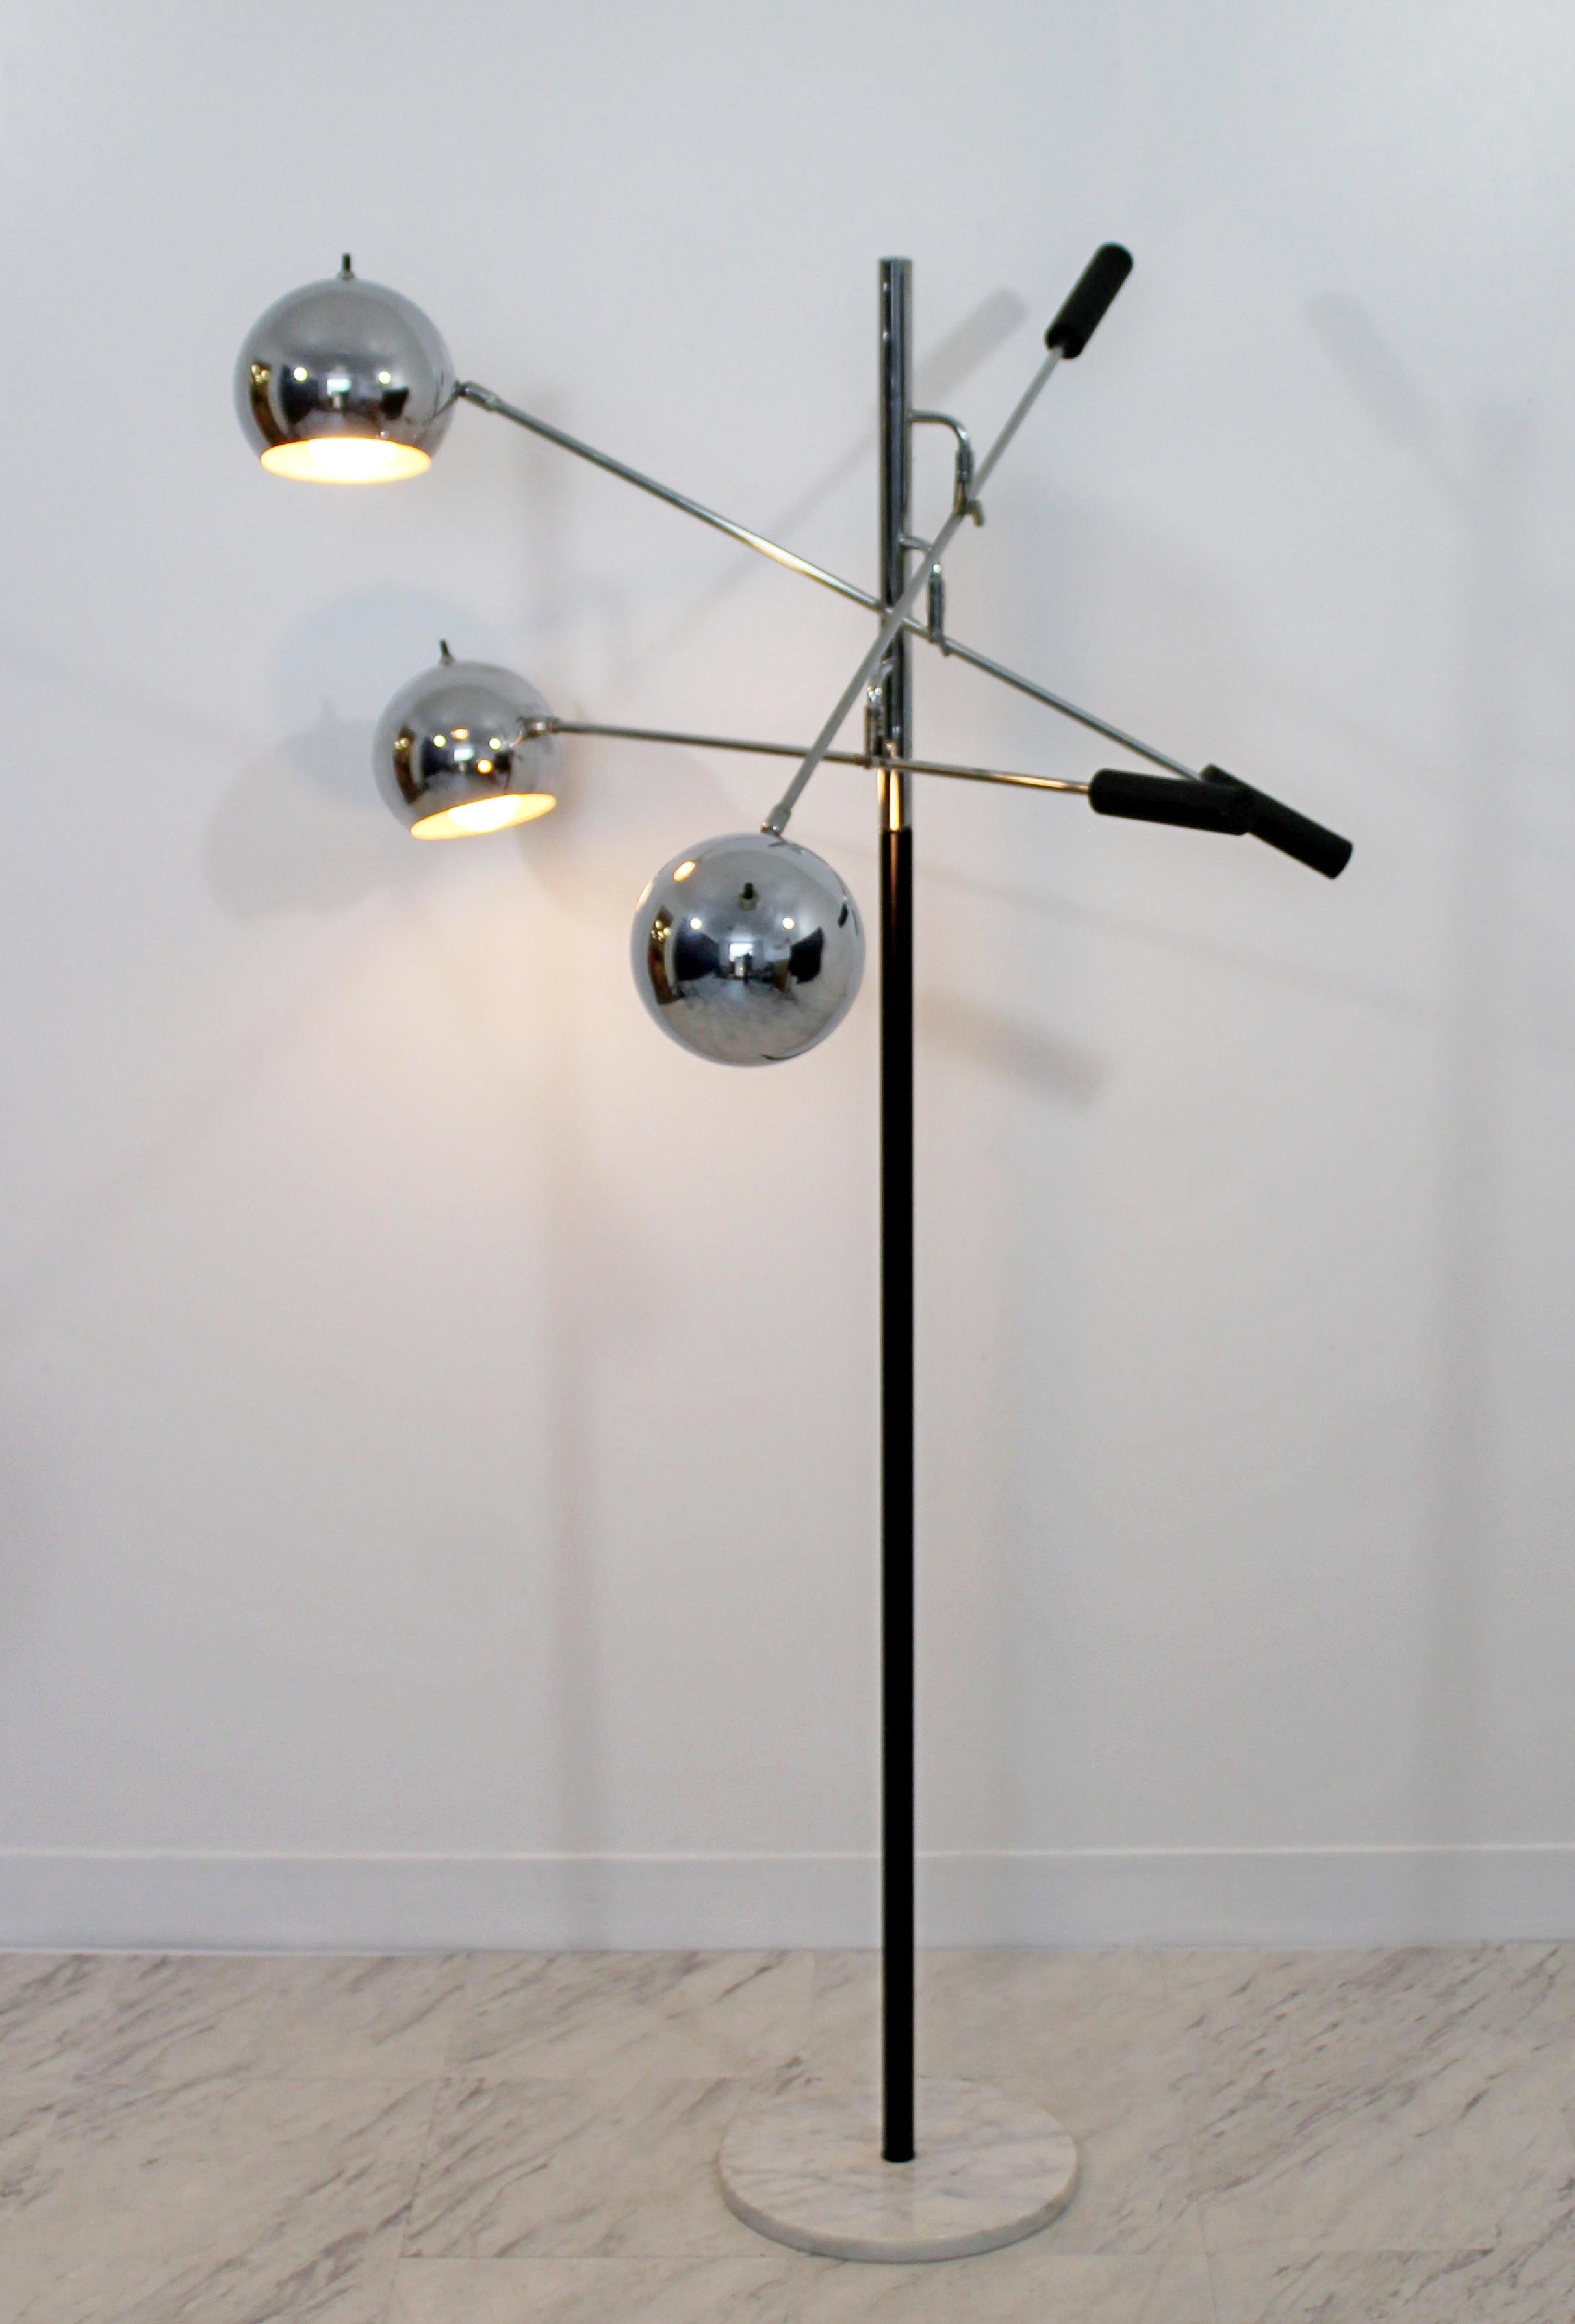 For your consideration is a fantastic floor lamp, with three adjustable chrome heads, on a white marble base, by Robert Sonneman, circa 1970s. In excellent condition. The dimensions are 34